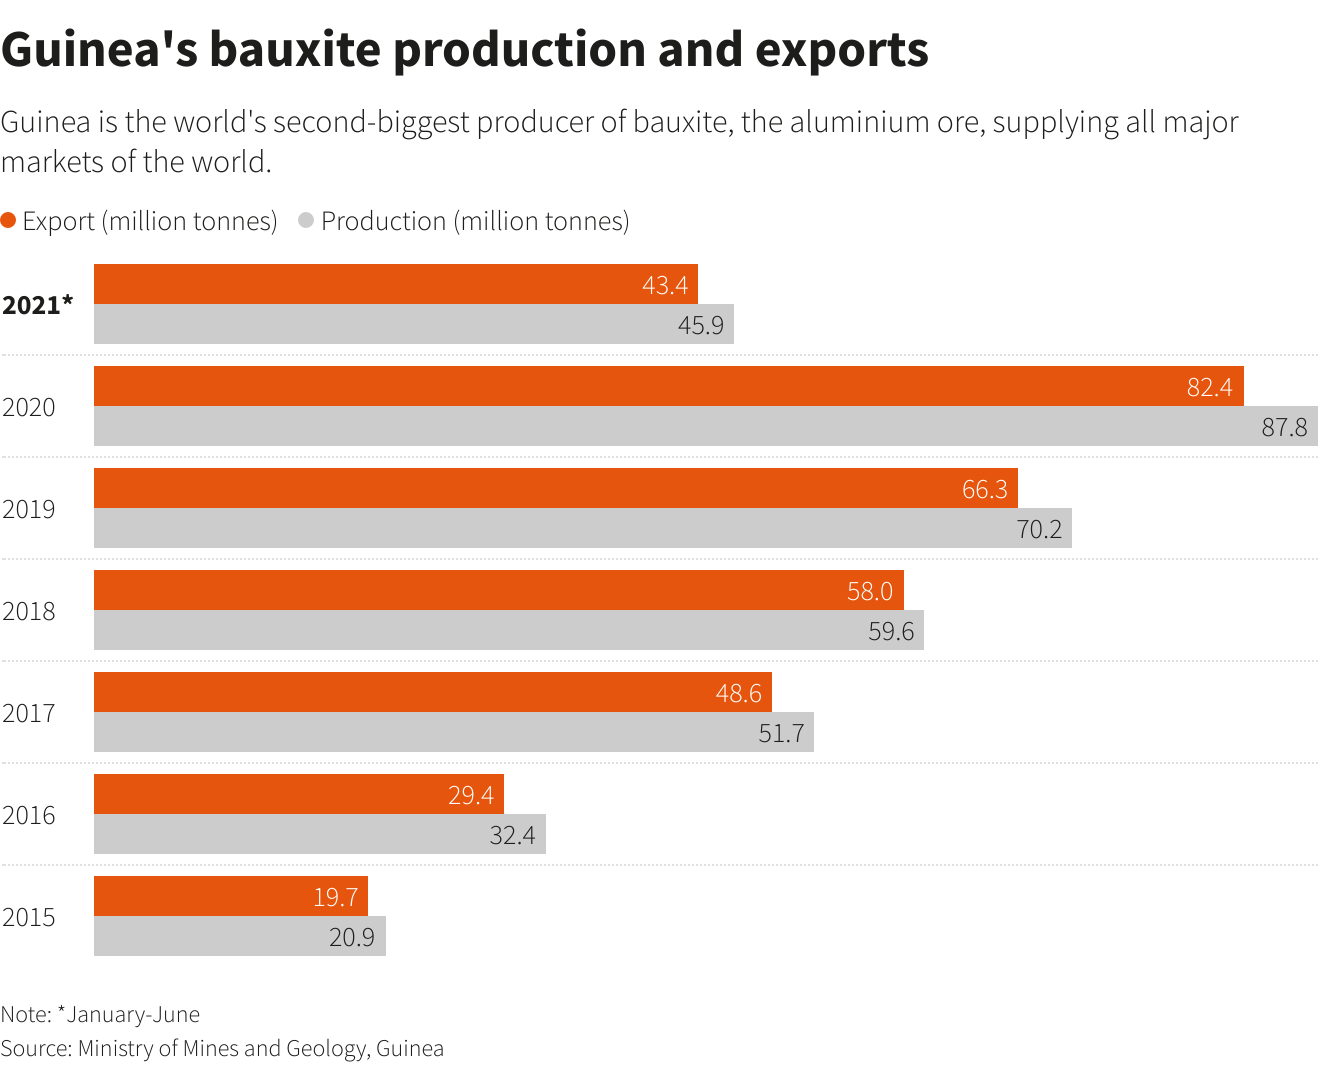 Guinea's bauxite production and exports